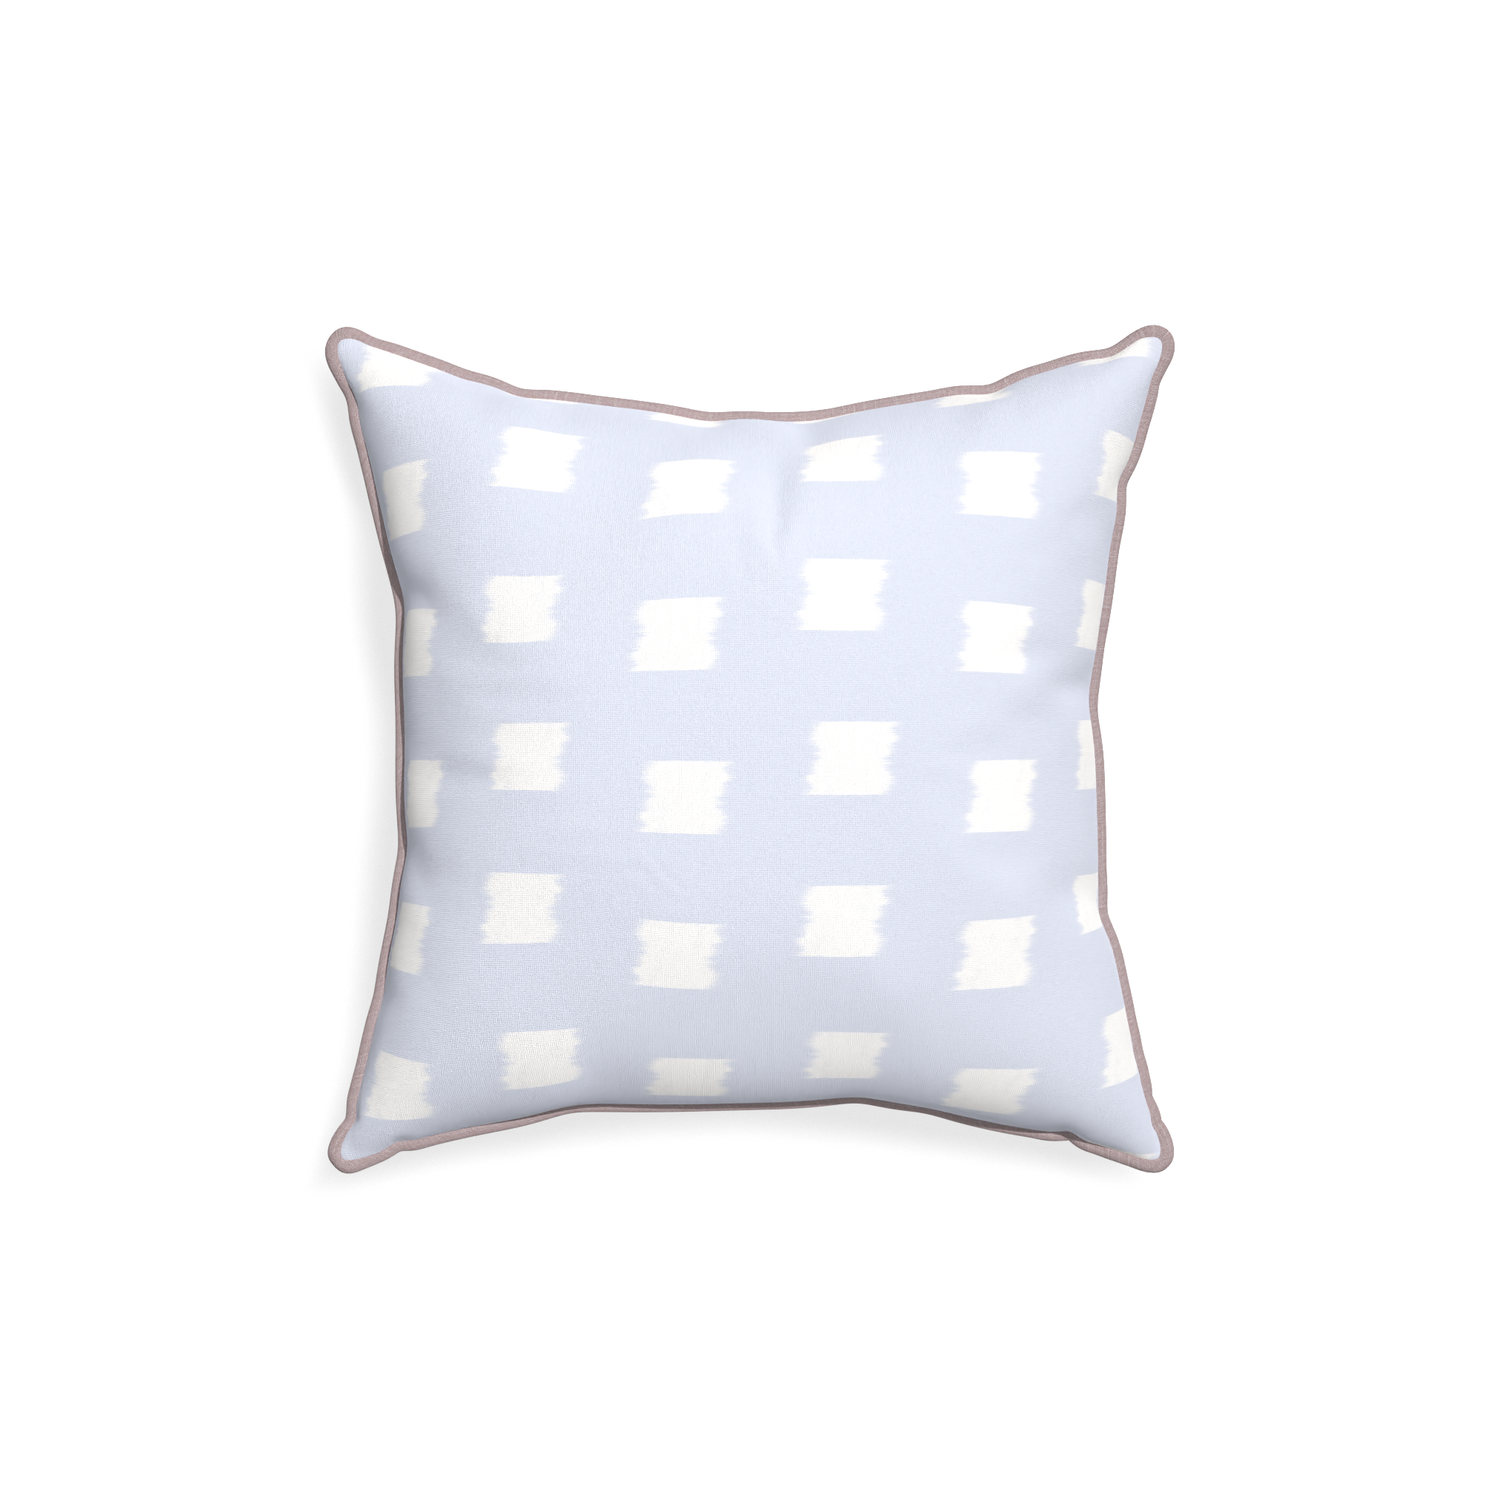 18-square denton custom sky blue patternpillow with orchid piping on white background